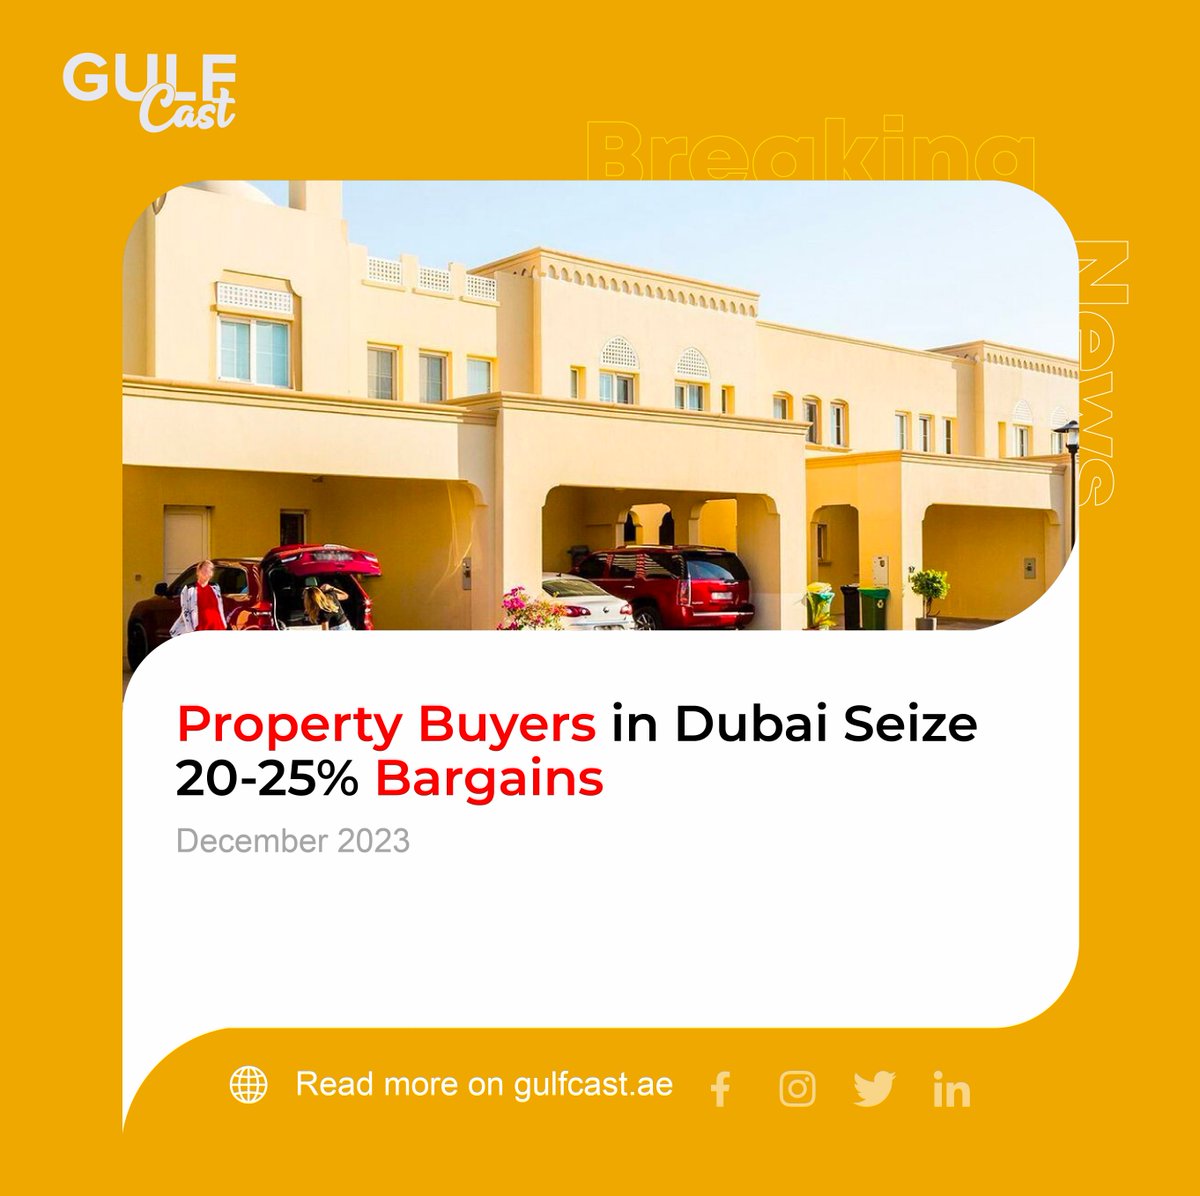 Secure your dream home at The Springs for less! Auctions in Dubai are offering premium homes at exceptional discounts, with 2-bedroom units fetching Dh1.9m.
Dive into: buff.ly/4ajzJVC 
#gulfcast #DubaiRealEstate #PropertyAuctions #TheSprings #Dubai